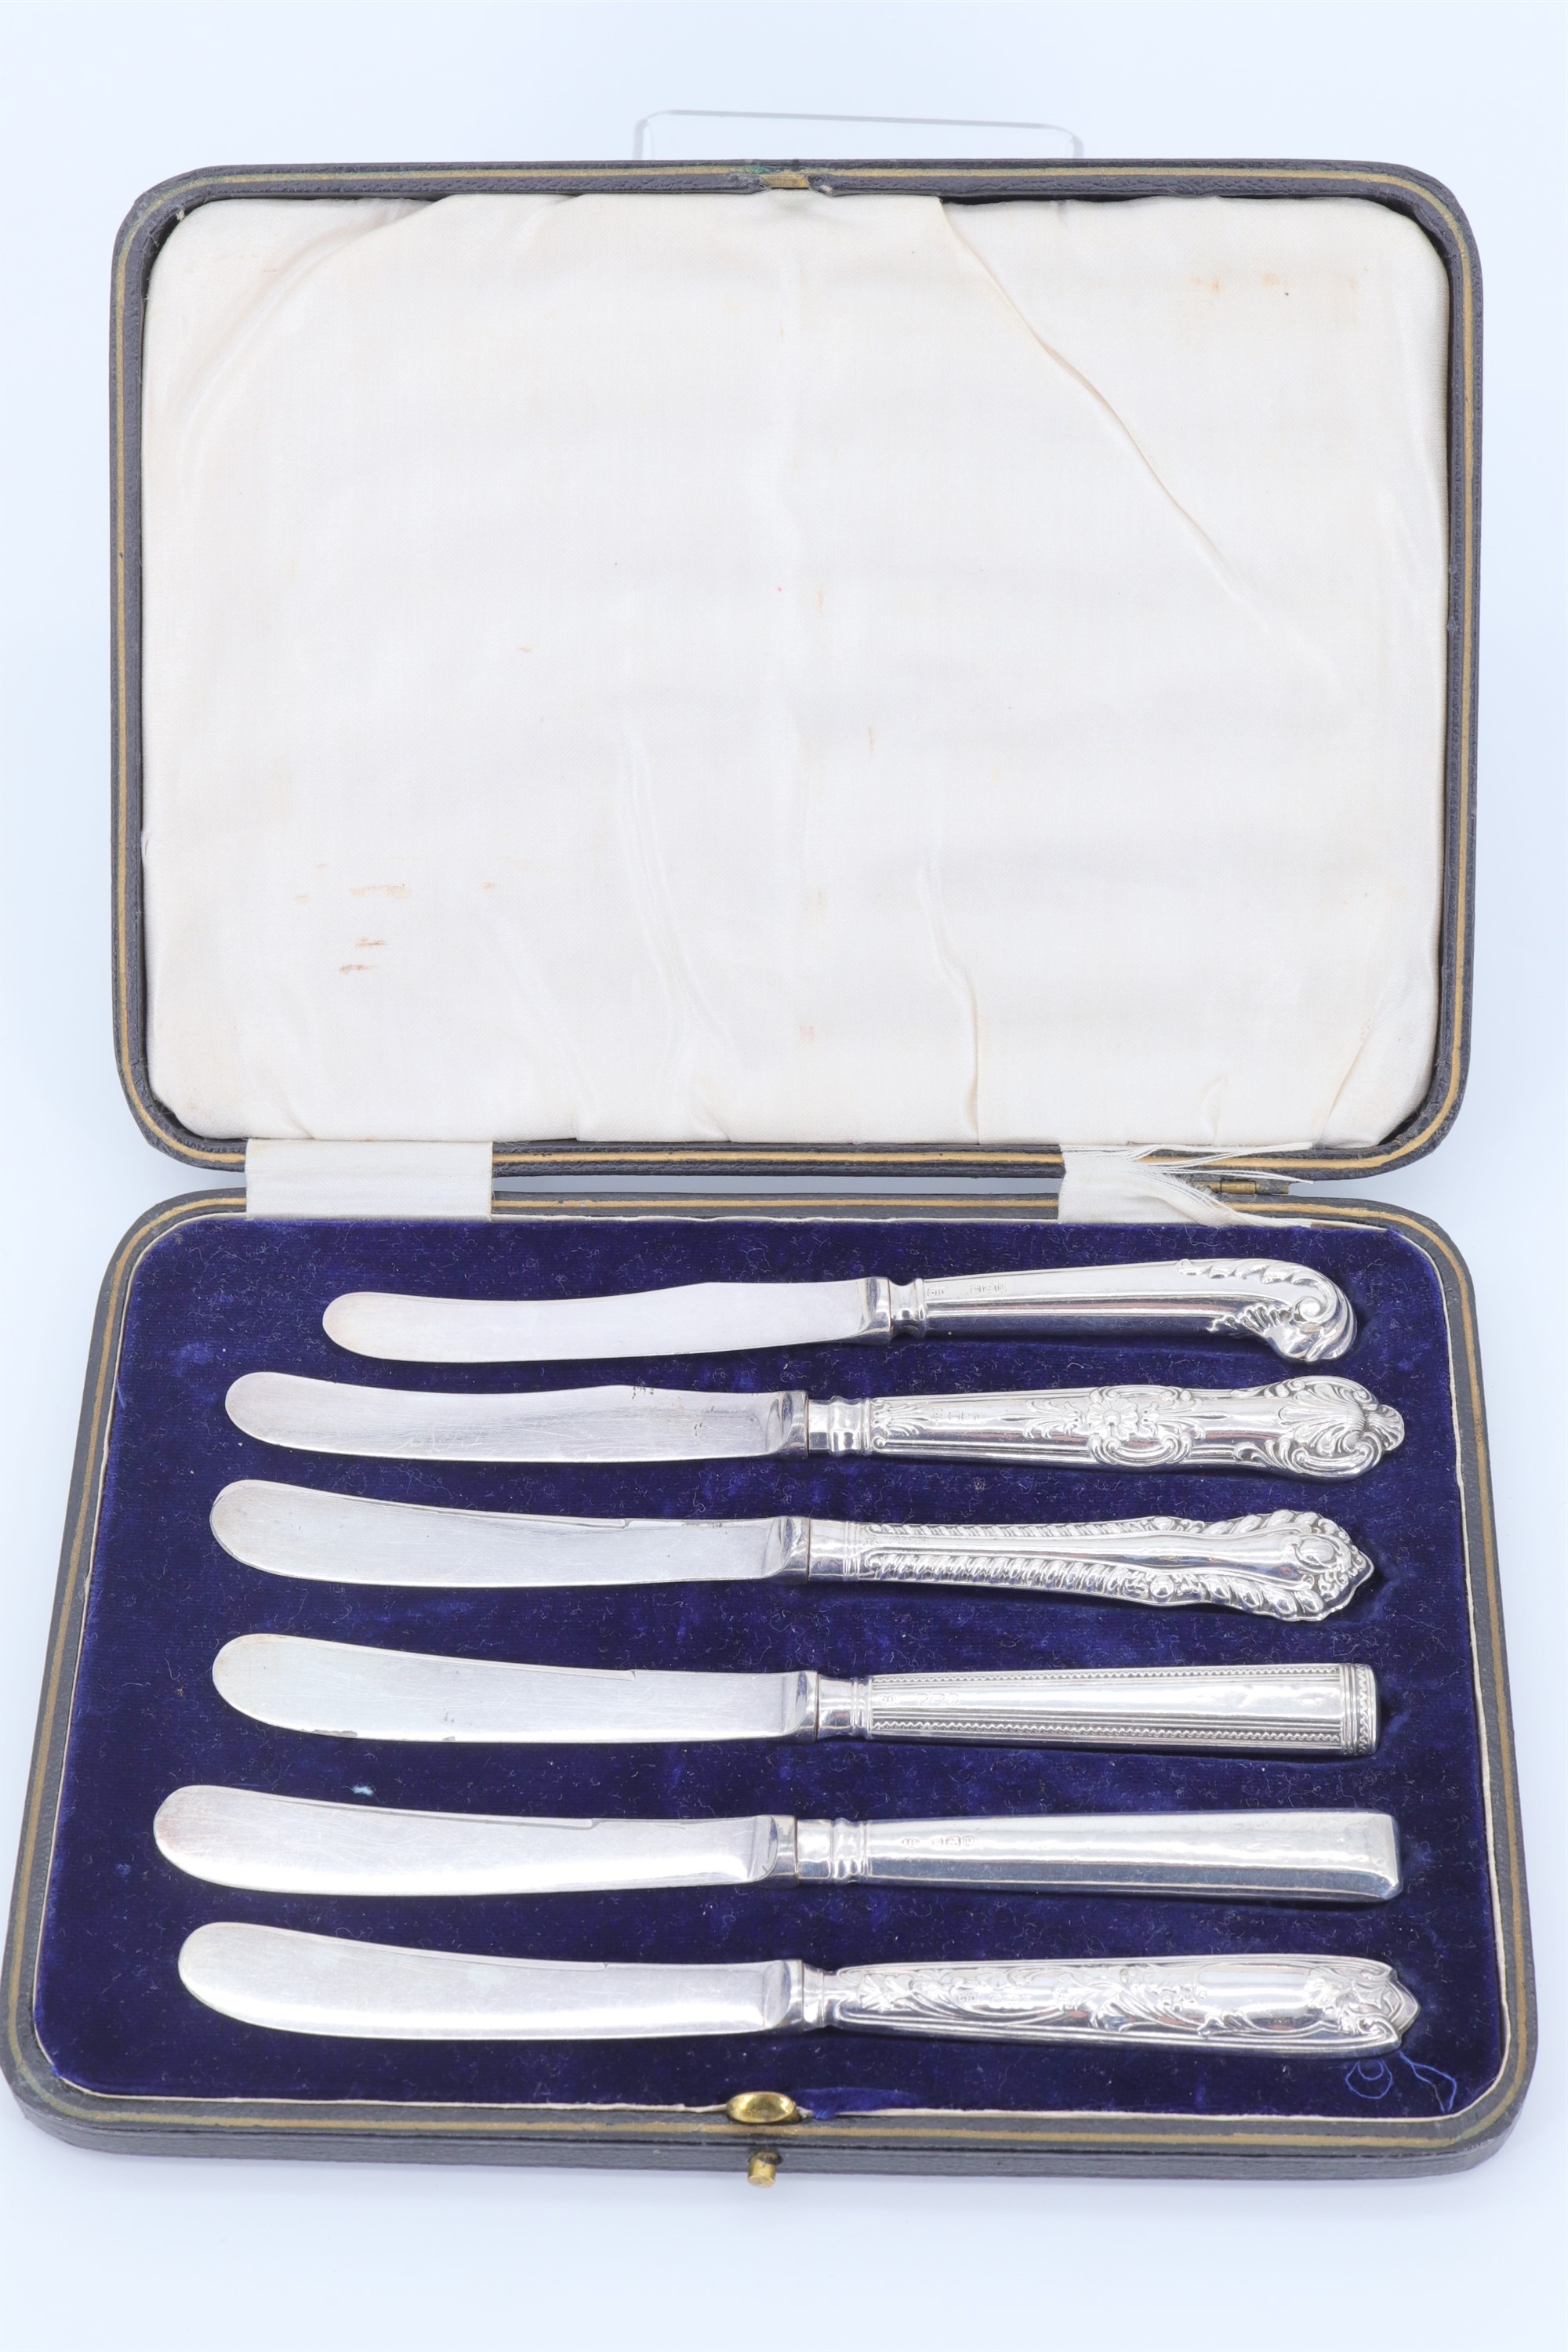 A cased harlequin set of silver handled tea knives, early 20th Century, 15.5 cm - 17 cm